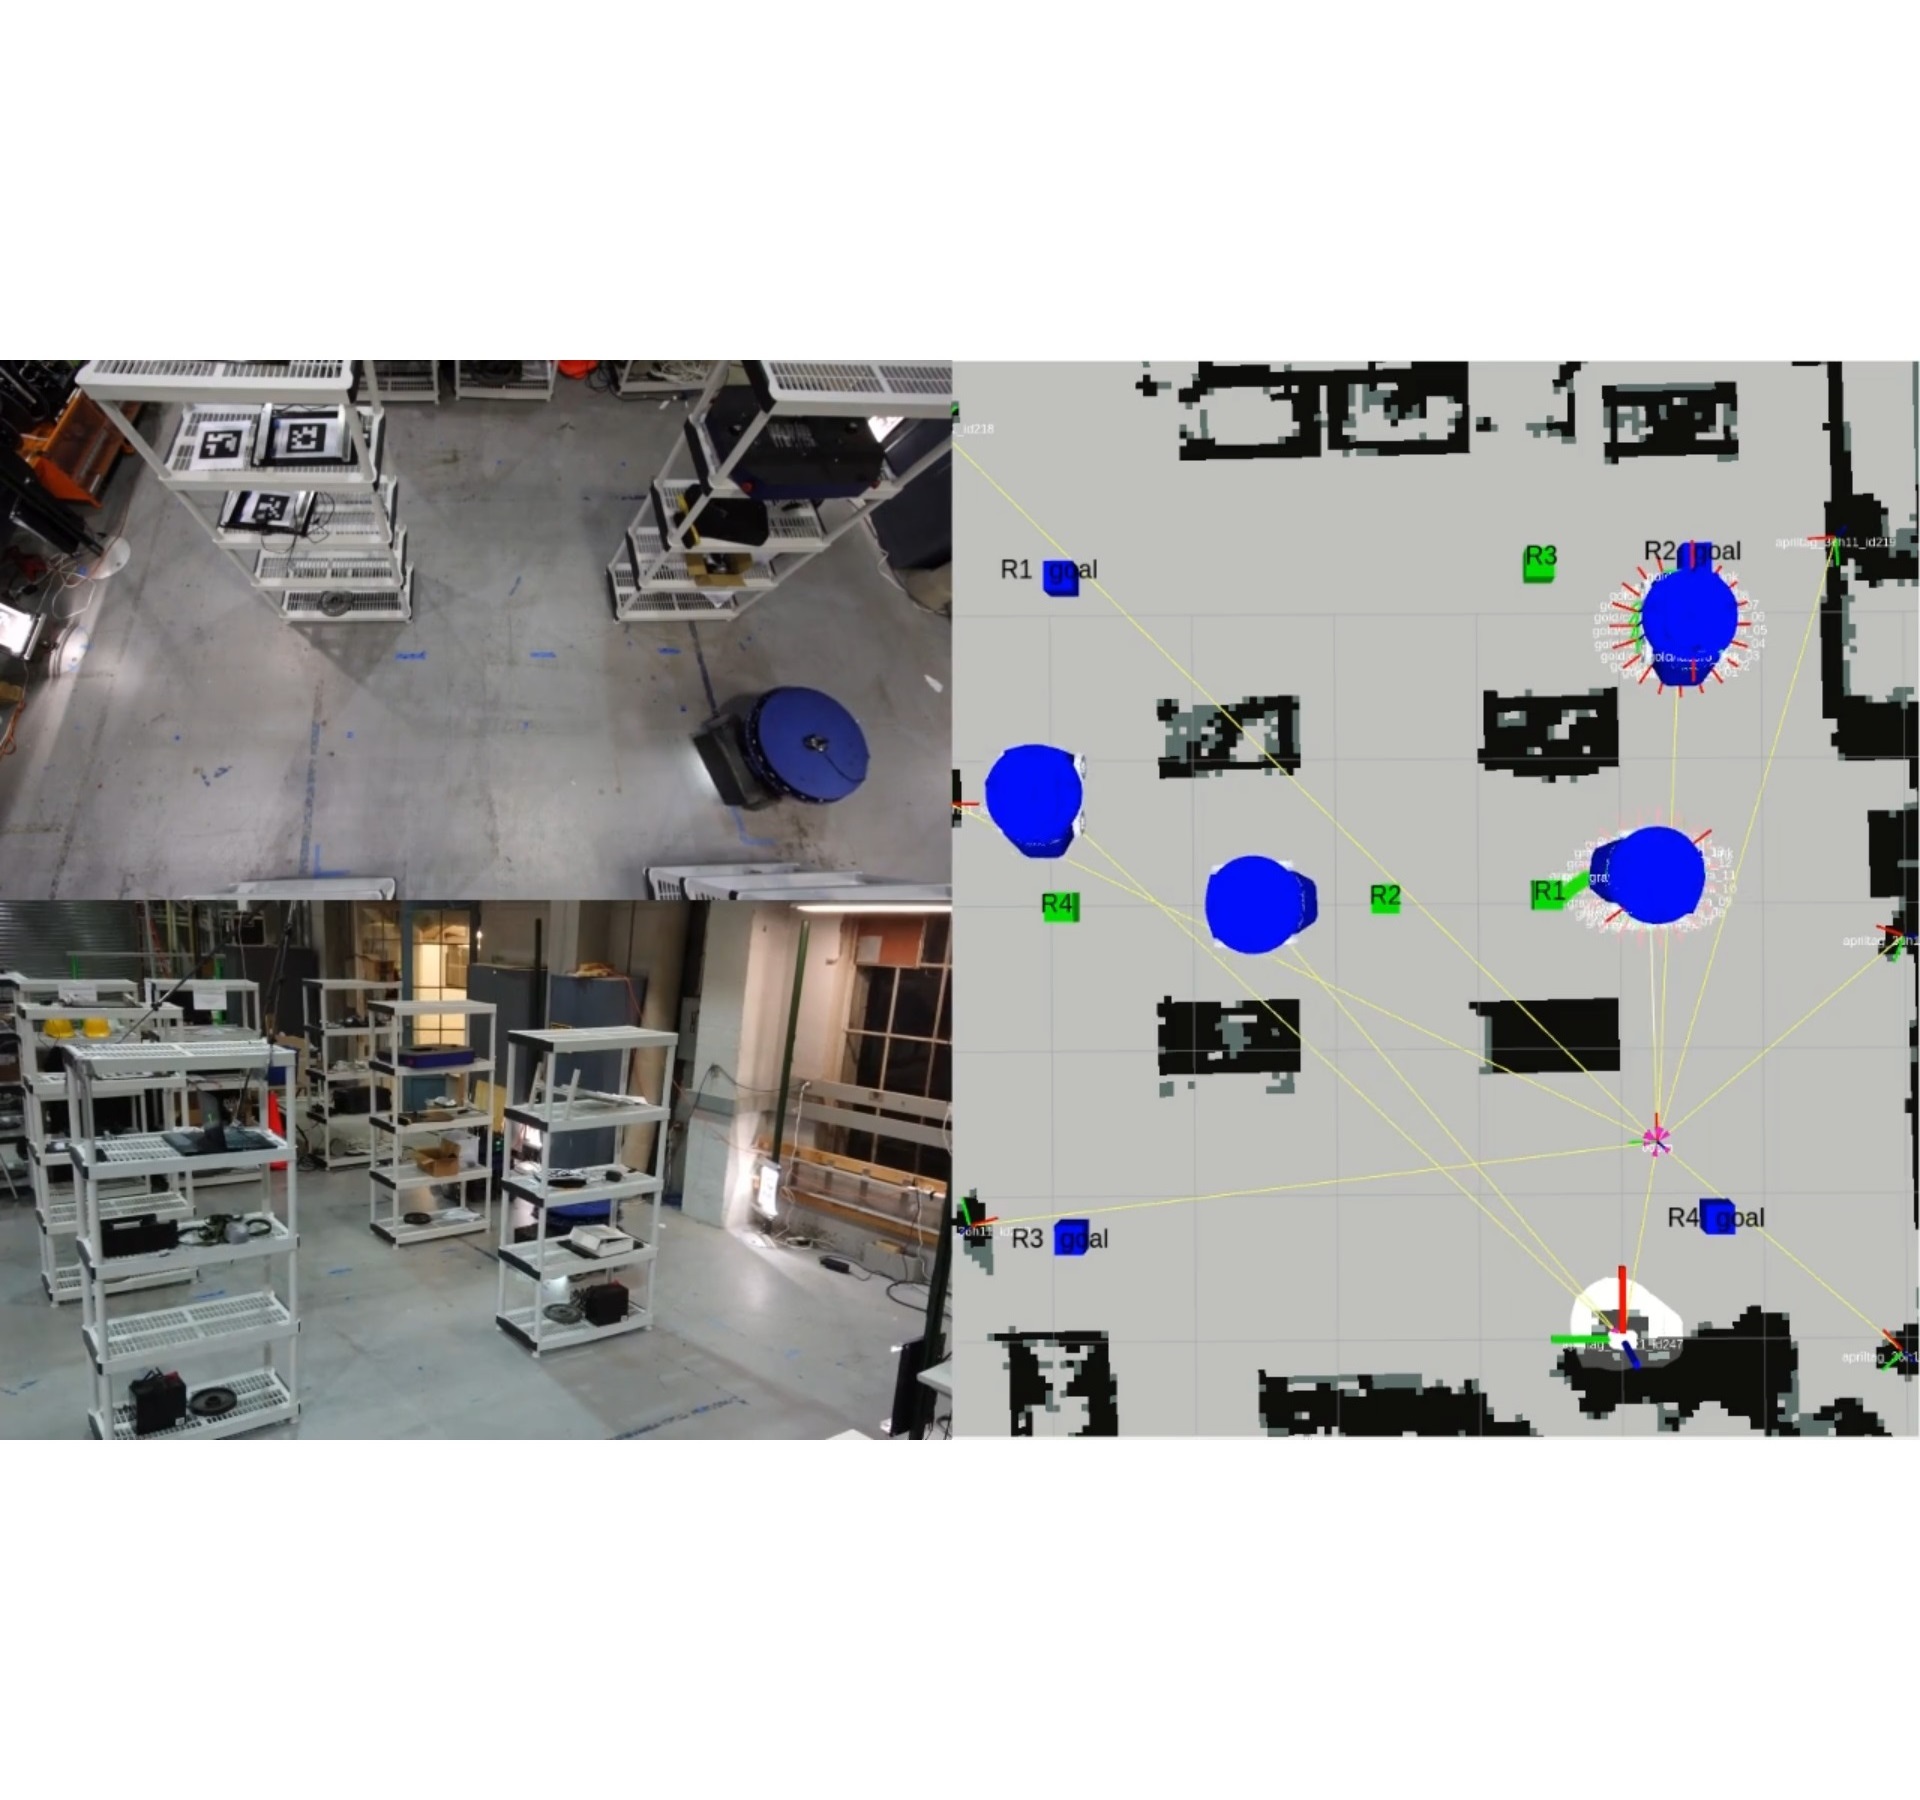 Multi-robot path planning in factory-like environments